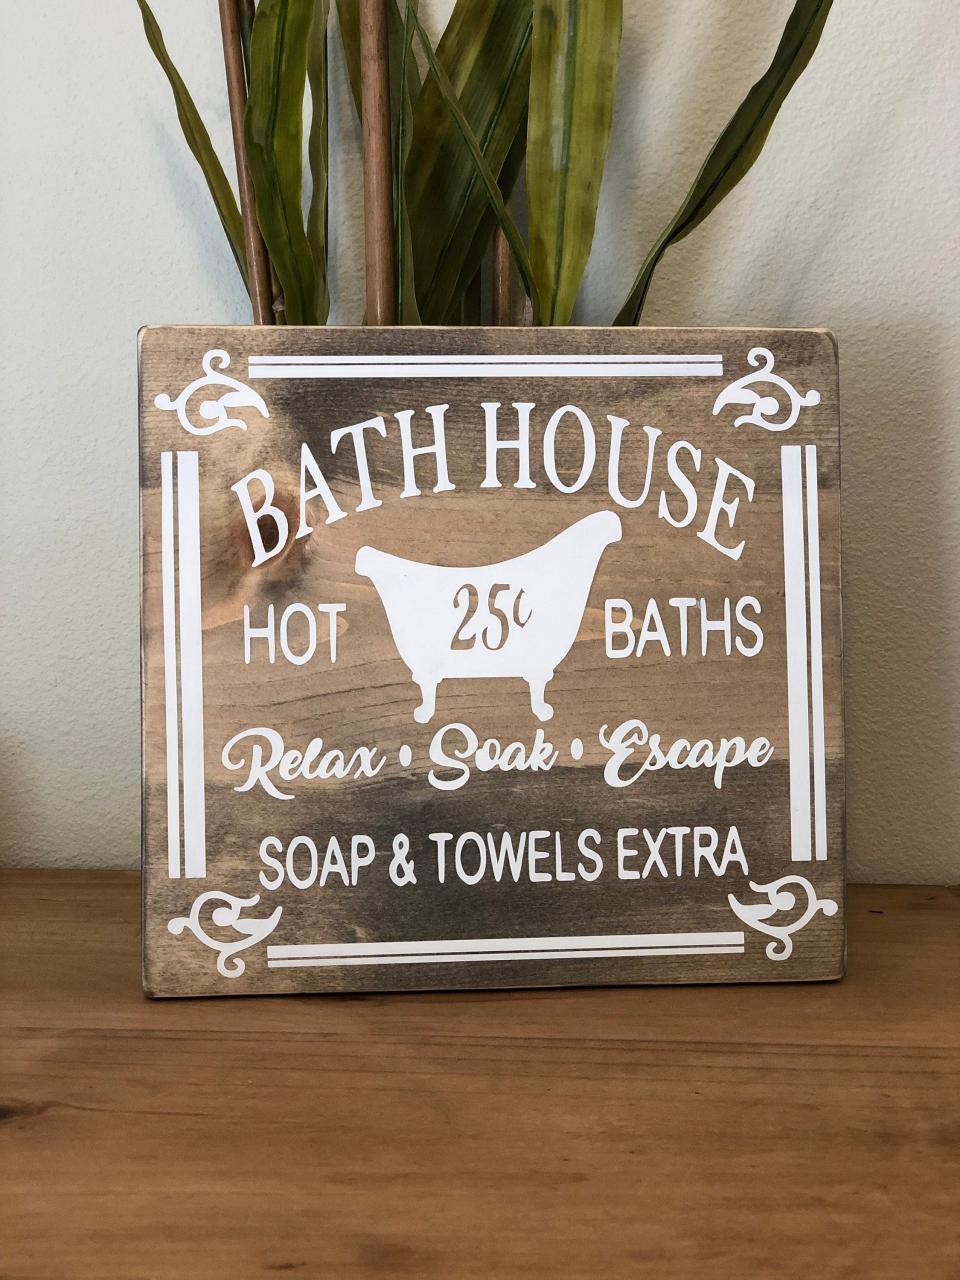 Bathhouse / wooden sign / bathroom decor / rustic sign / Etsy in 2021